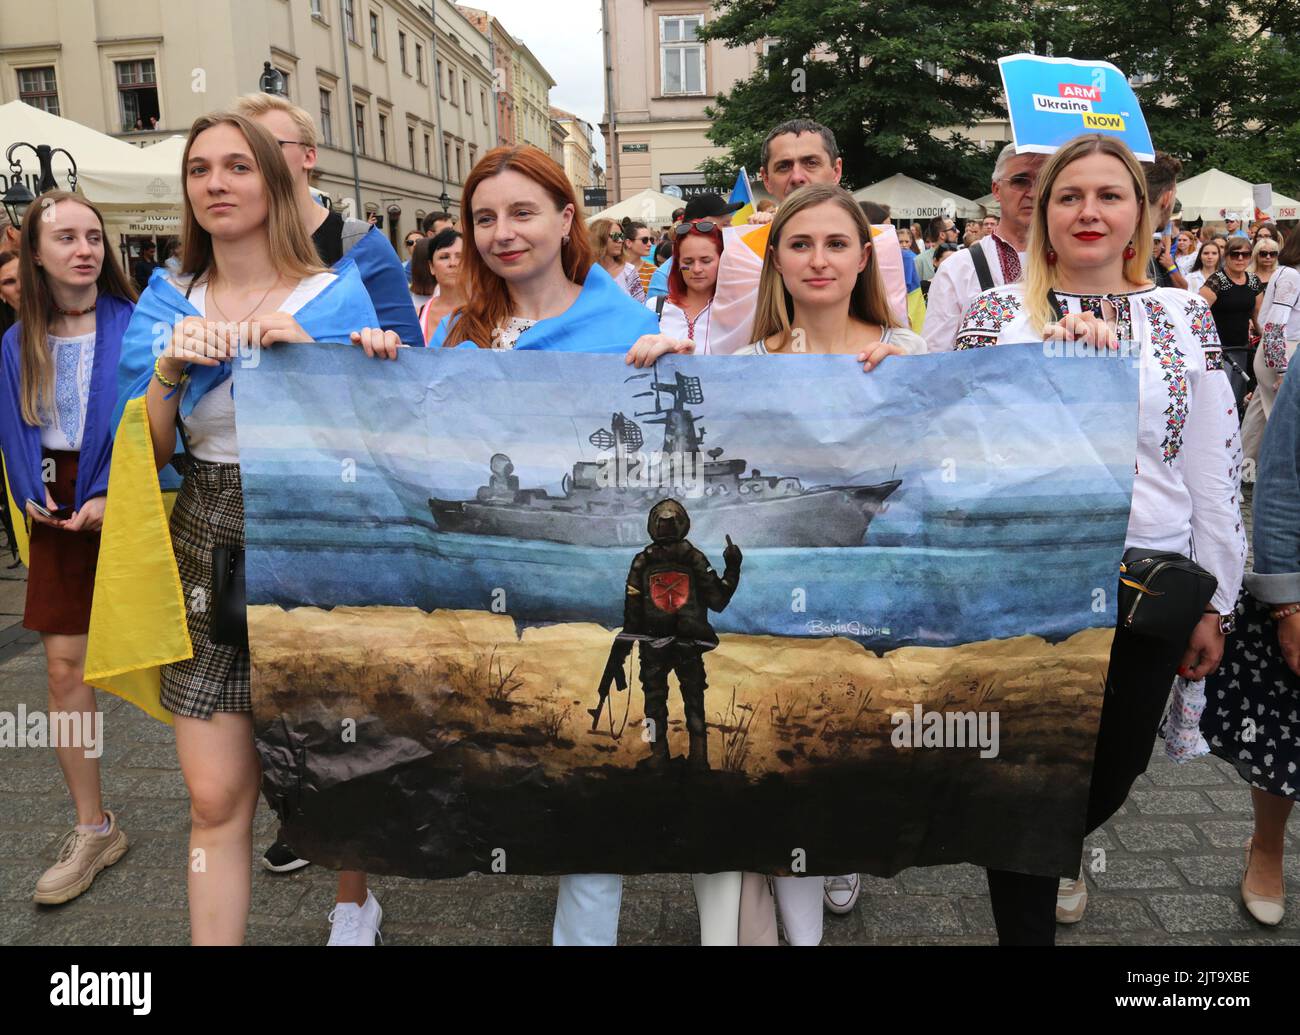 Cracow. Krakow. Poland. Ukrainian refugees celebrating Ukraine Independence Day at rally and parade. The  "Russian war ship fuck off" picture Stock Photo